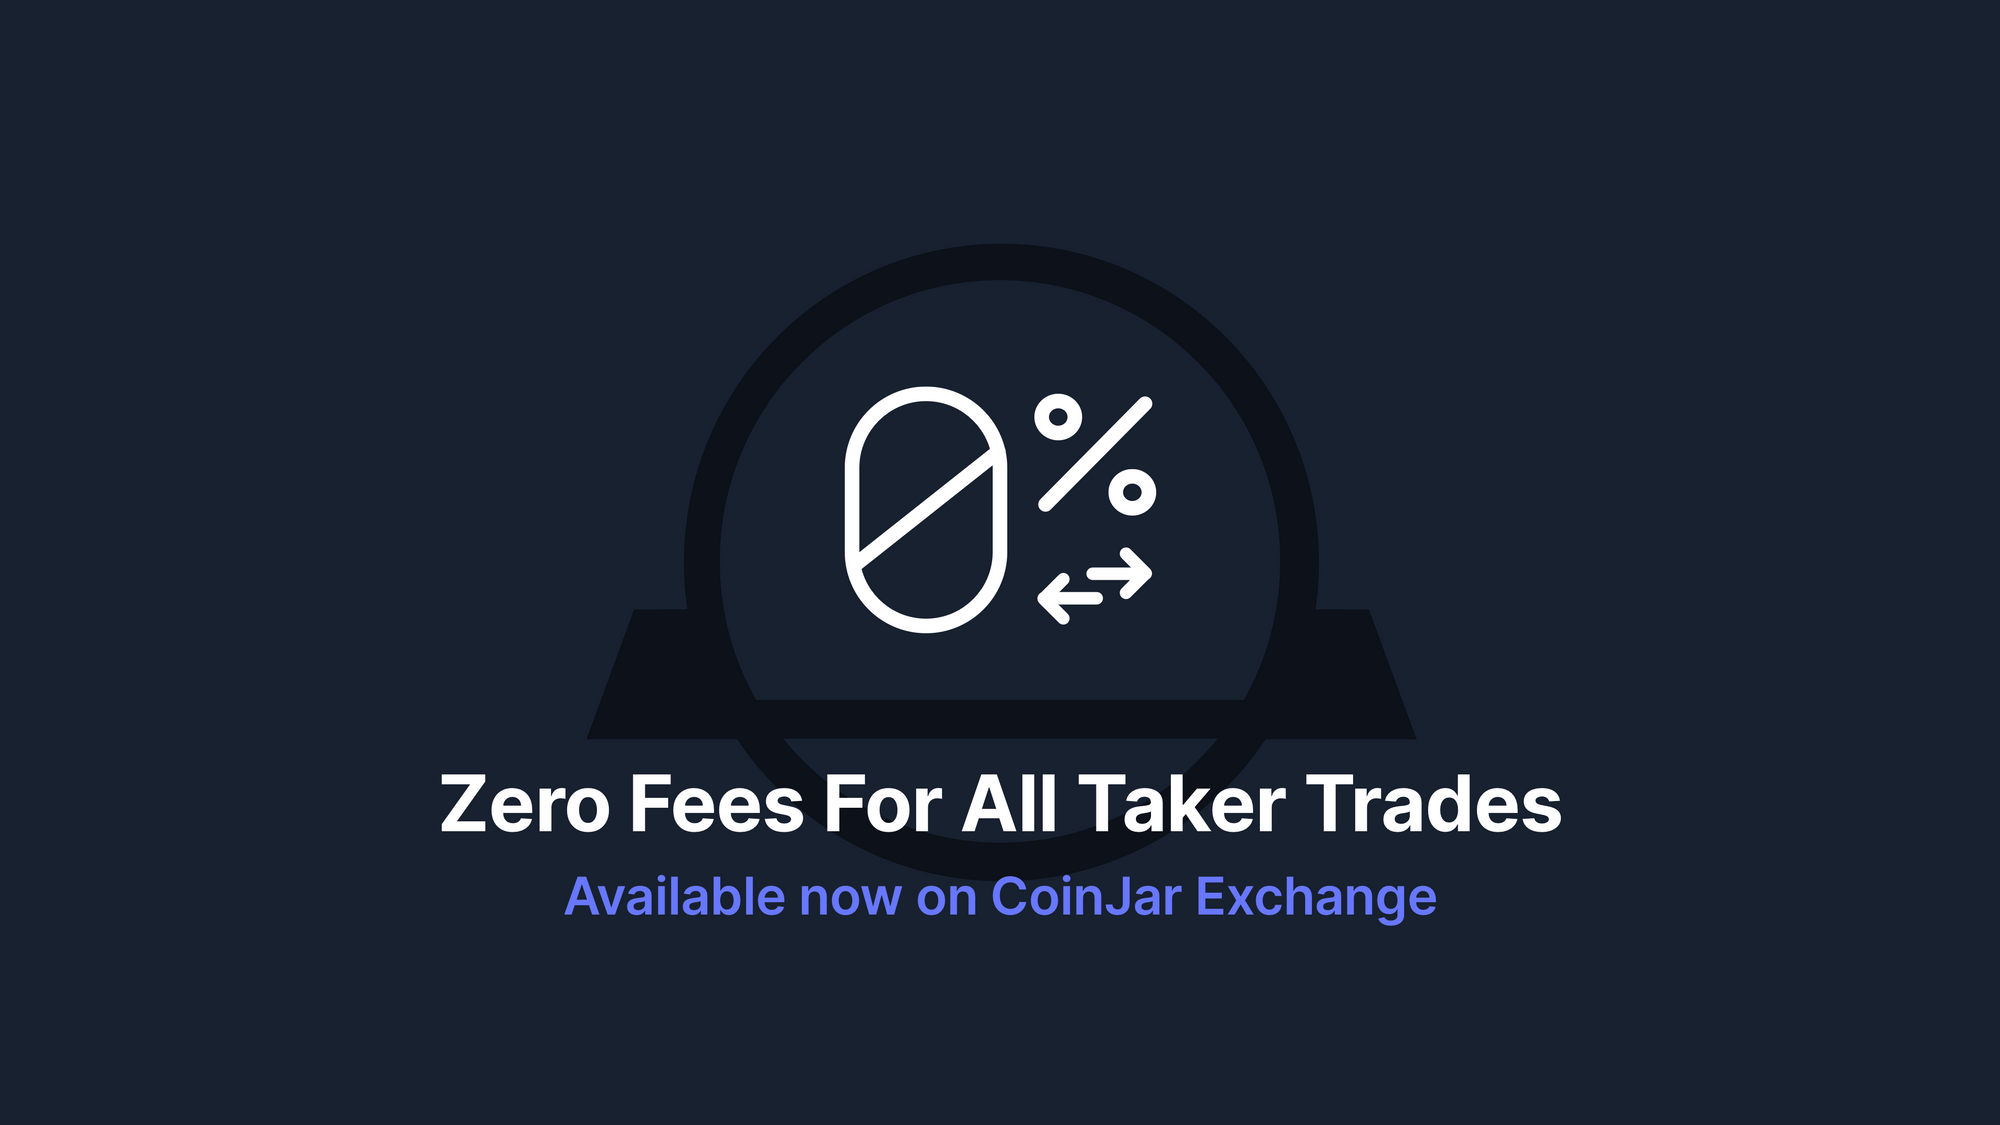 0% Fee Cryptocurrency Trading on CoinJar Exchange